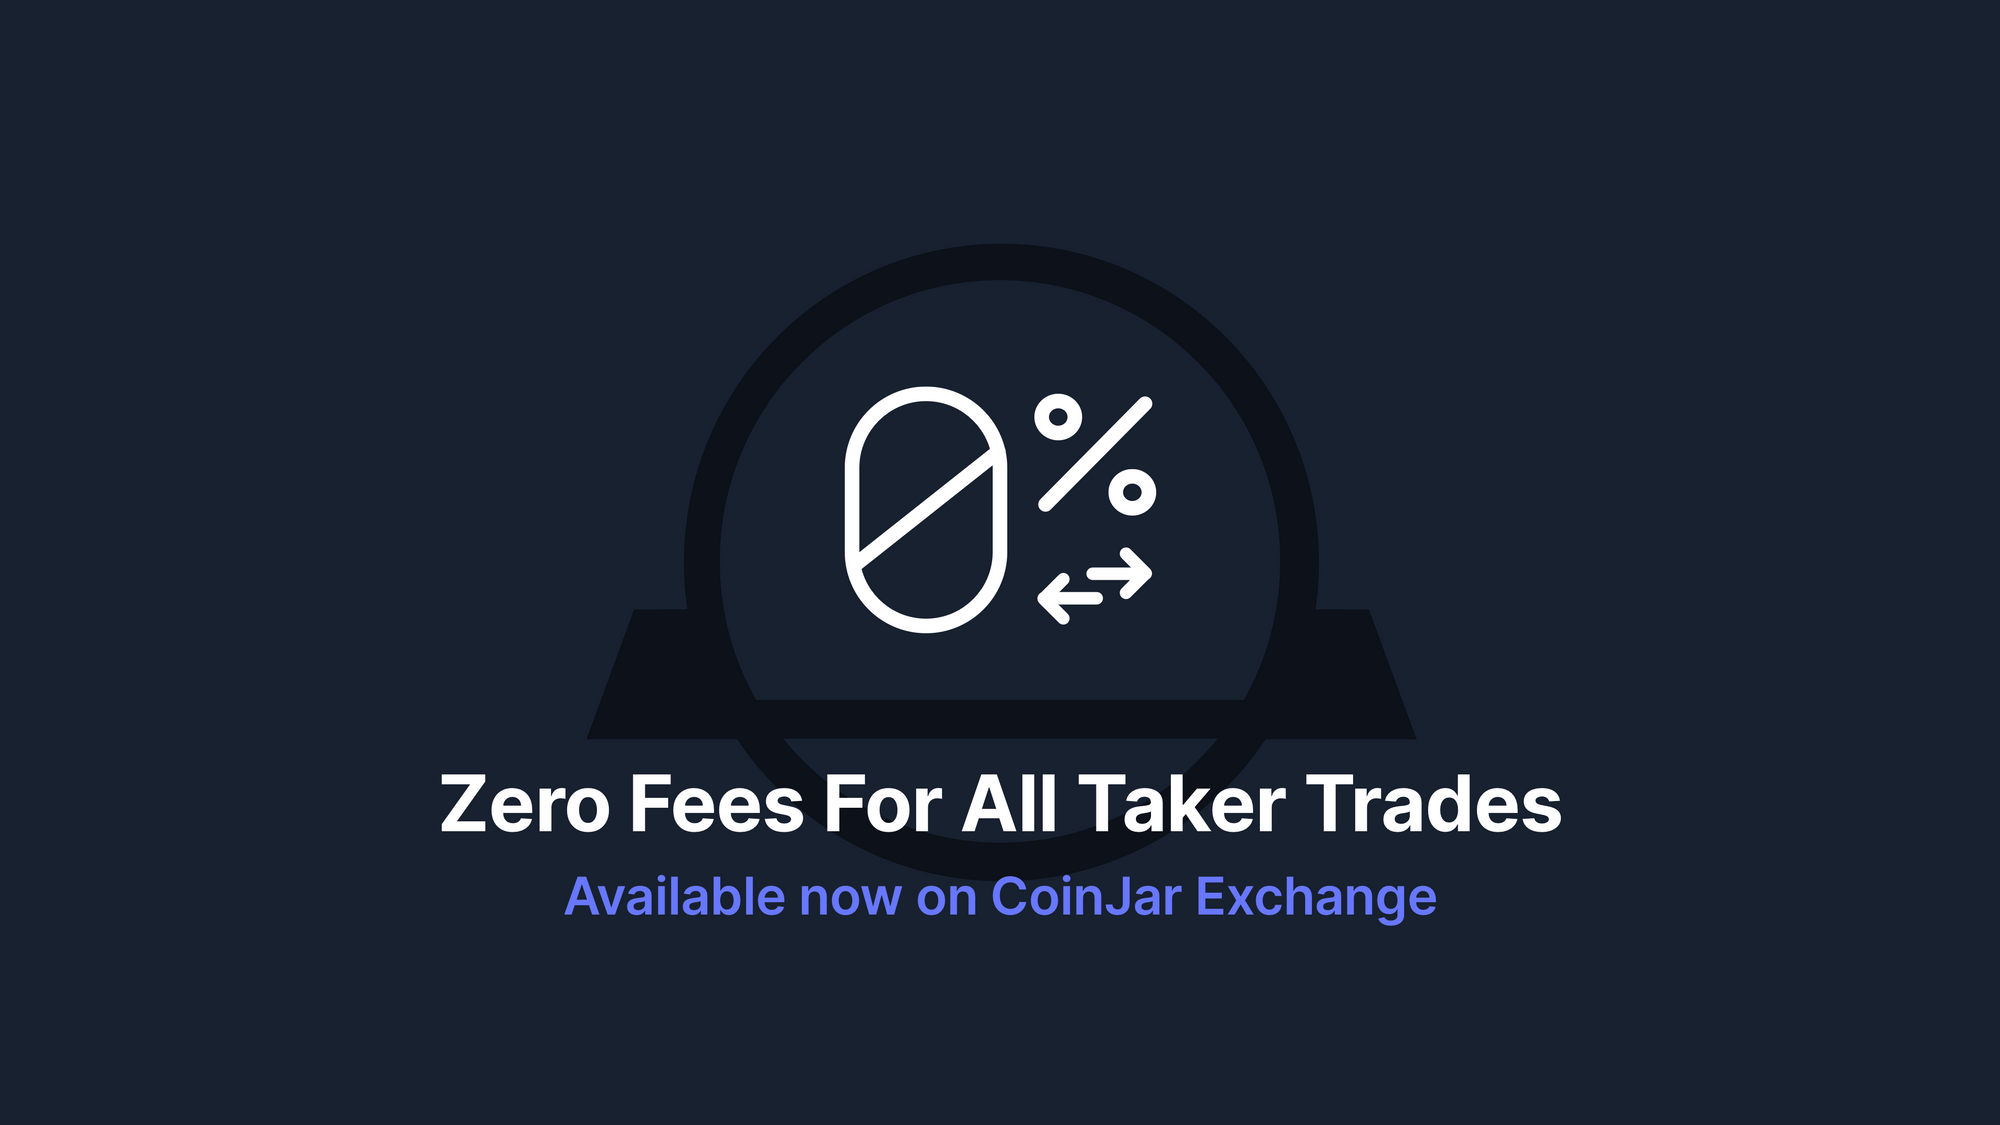 0% Fee Cryptocurrency Trading on CoinJar Exchange